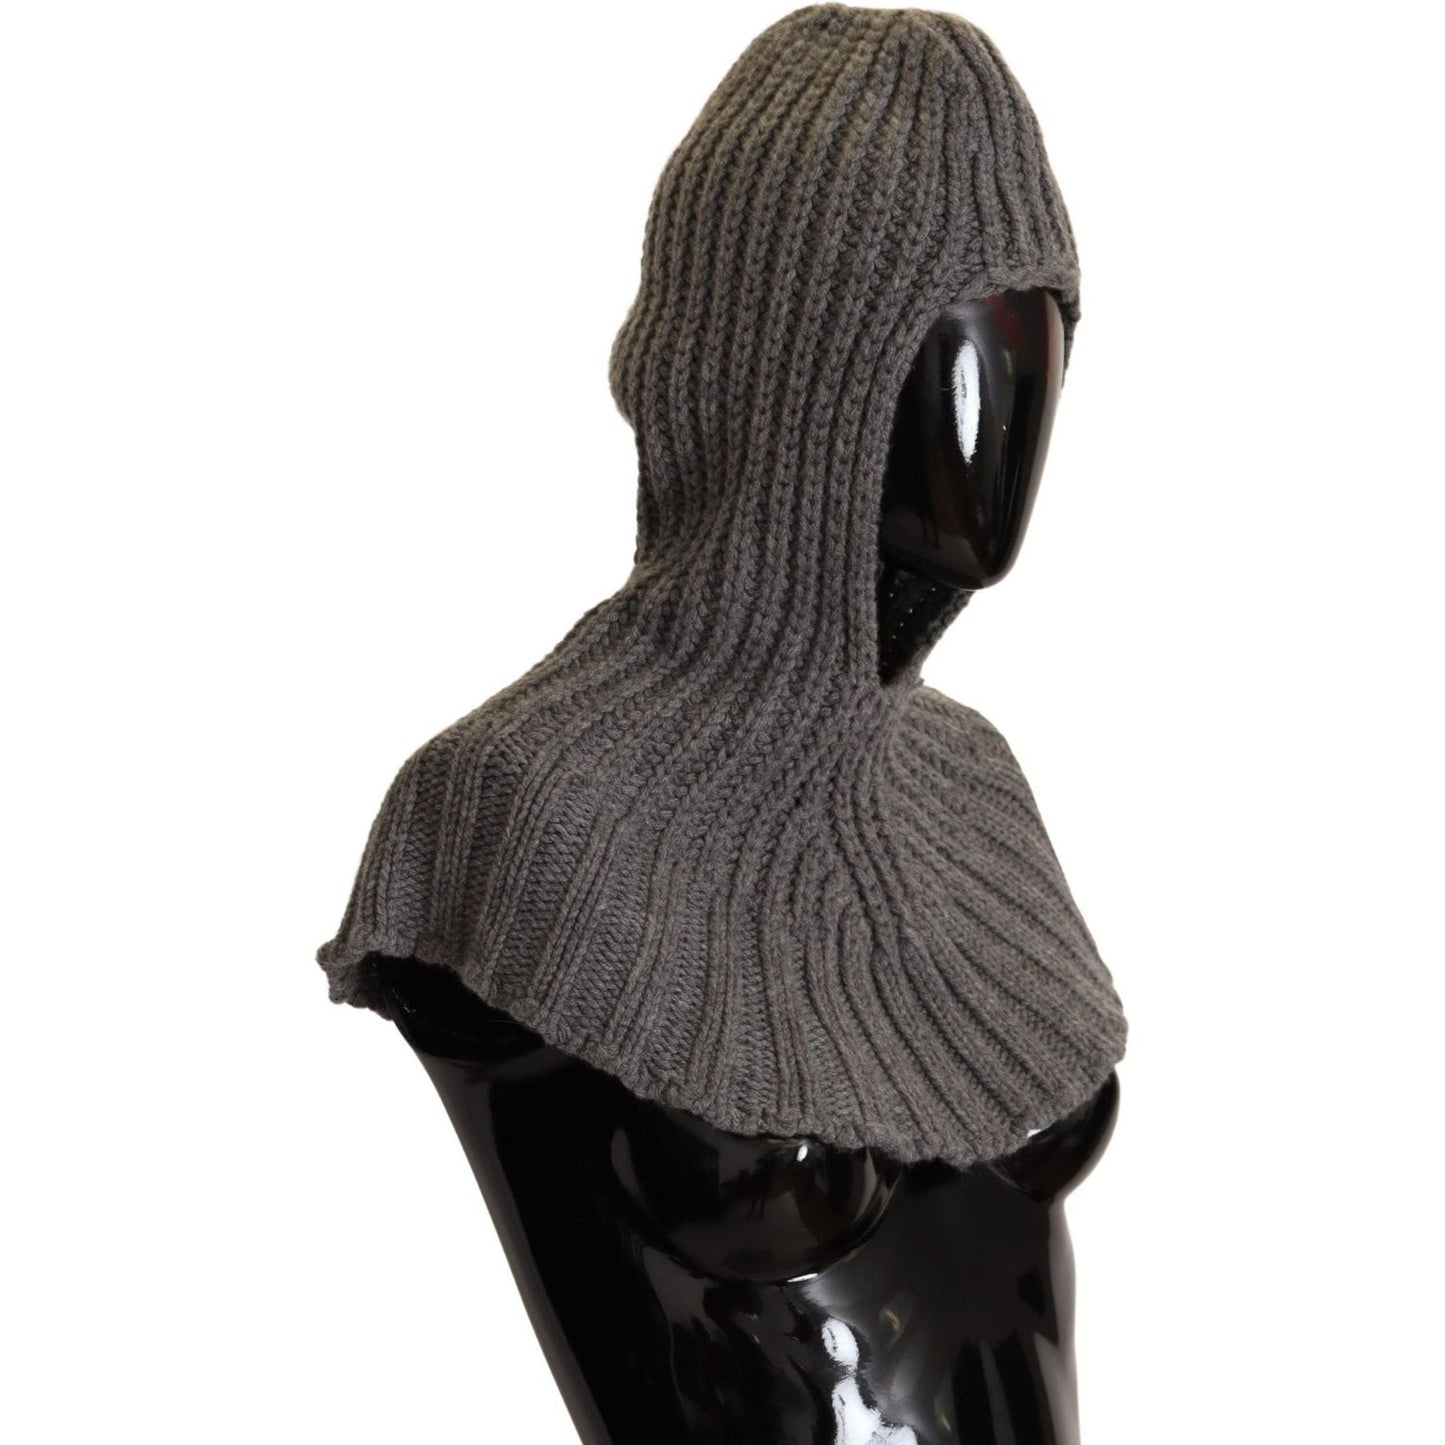 Dolce & Gabbana Elegant Cashmere Hood Scarf in Gray gray-100-cashmere-knitted-wrap-one-size-scarf IMG_0119-scaled-c6ce22c4-5e6.jpg